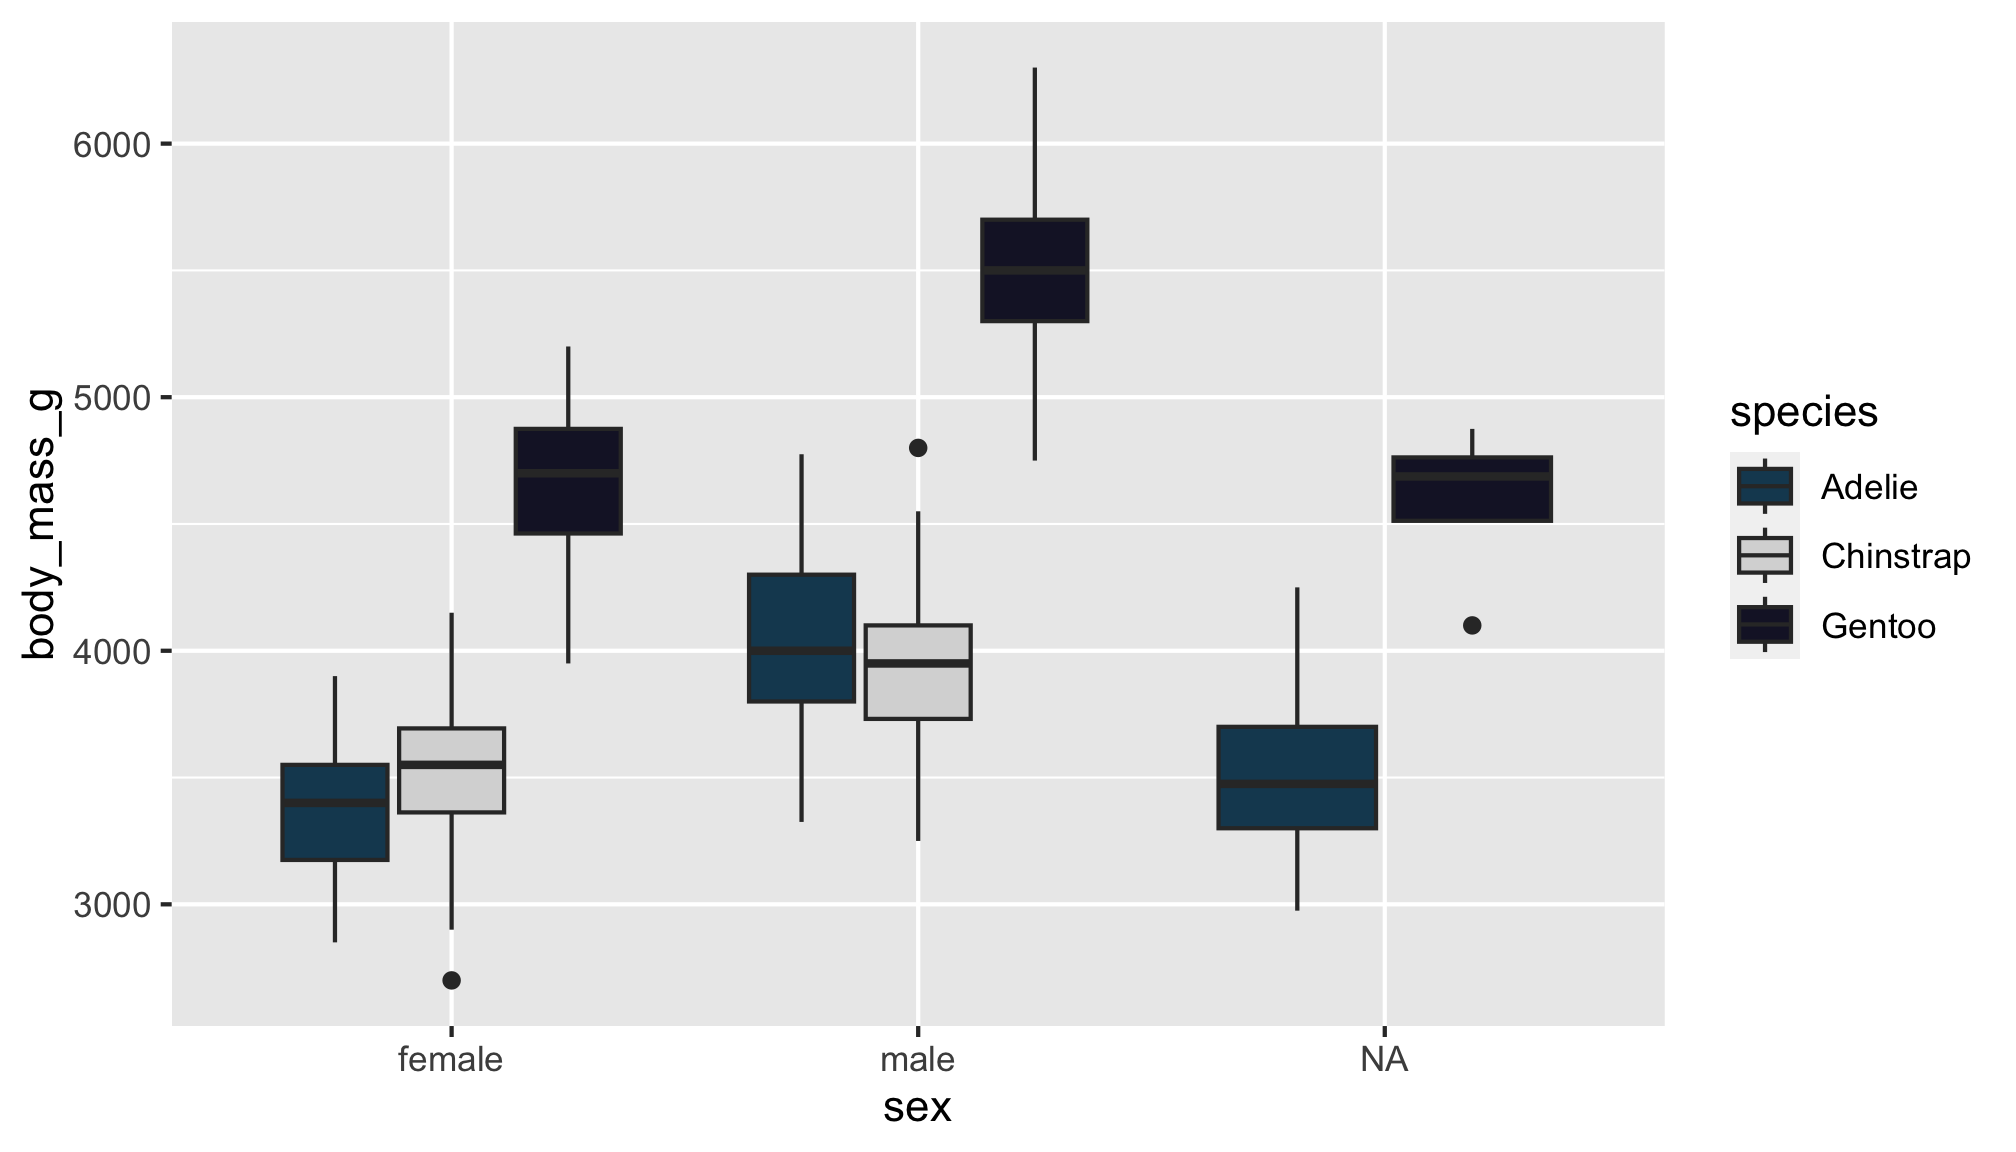 In contrast to the other filled boxplot referred to in this tab, this one is filled with nordic colors. Gentoo boxplots are a dark purple, Adélie boxplots are a dark teal, and Chinstrap boxplots are a snowy white.